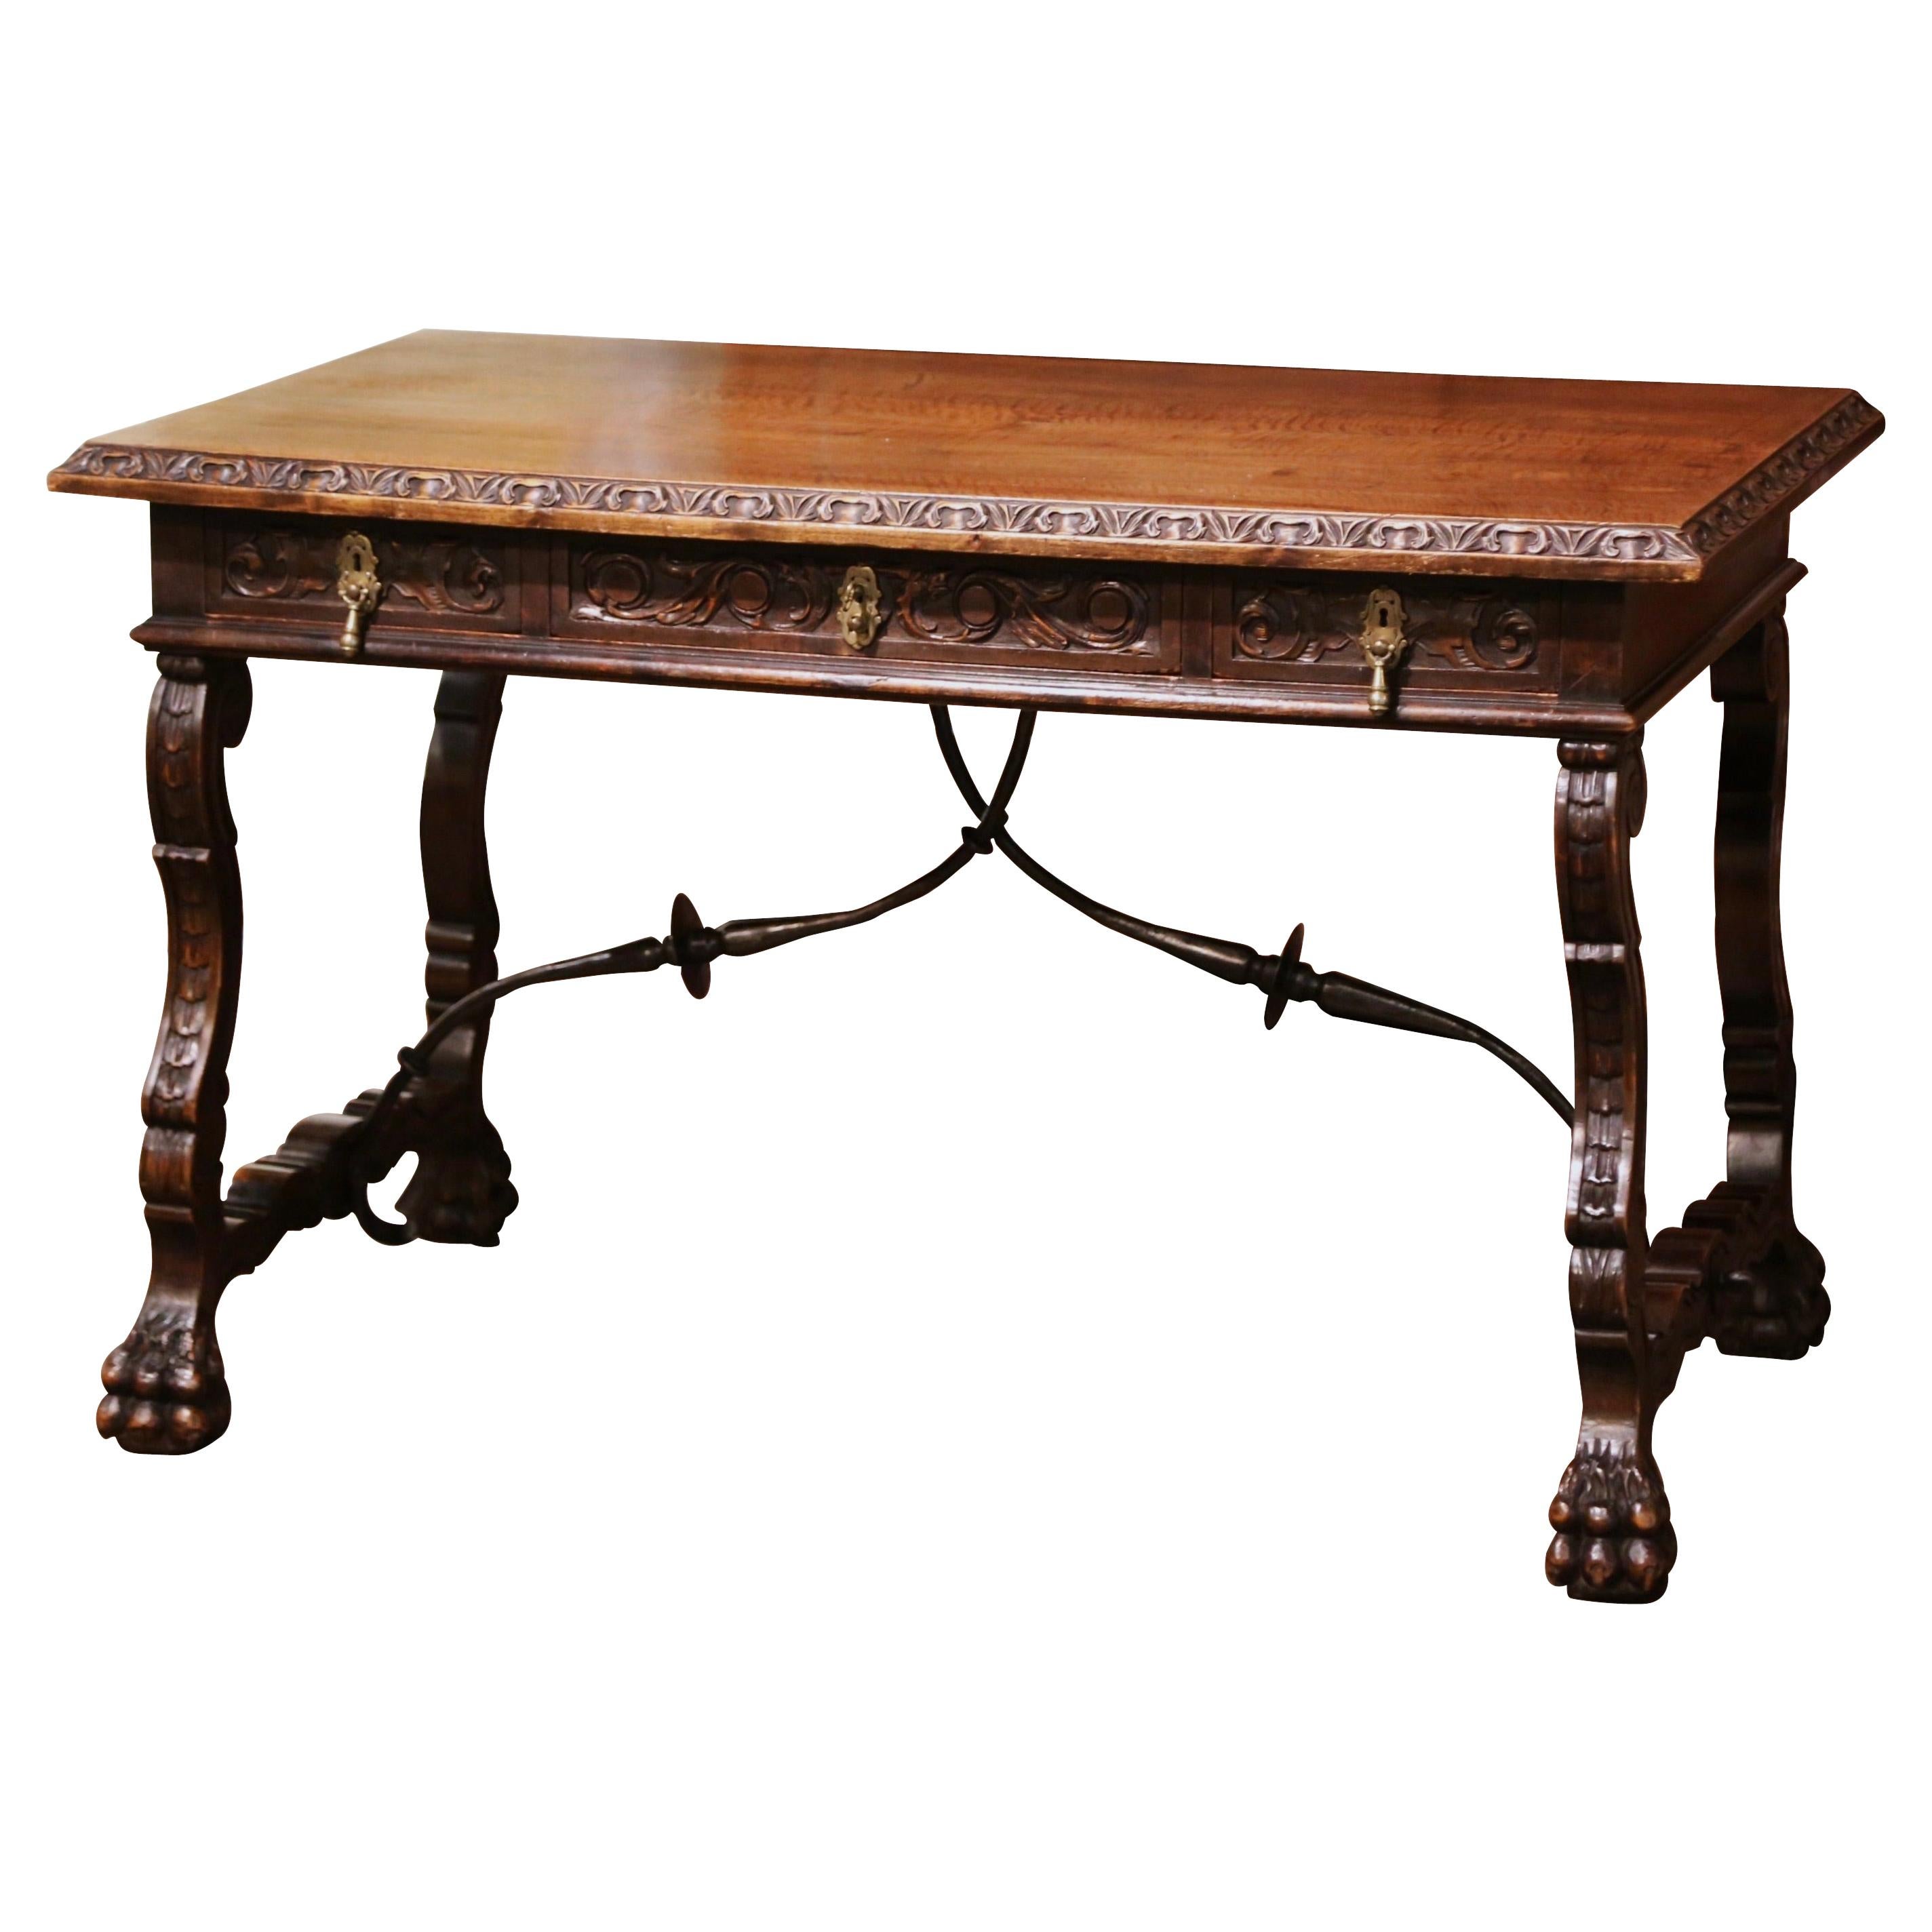 19th Century Spanish Carved Walnut and Iron Writing Table Desk with Drawers